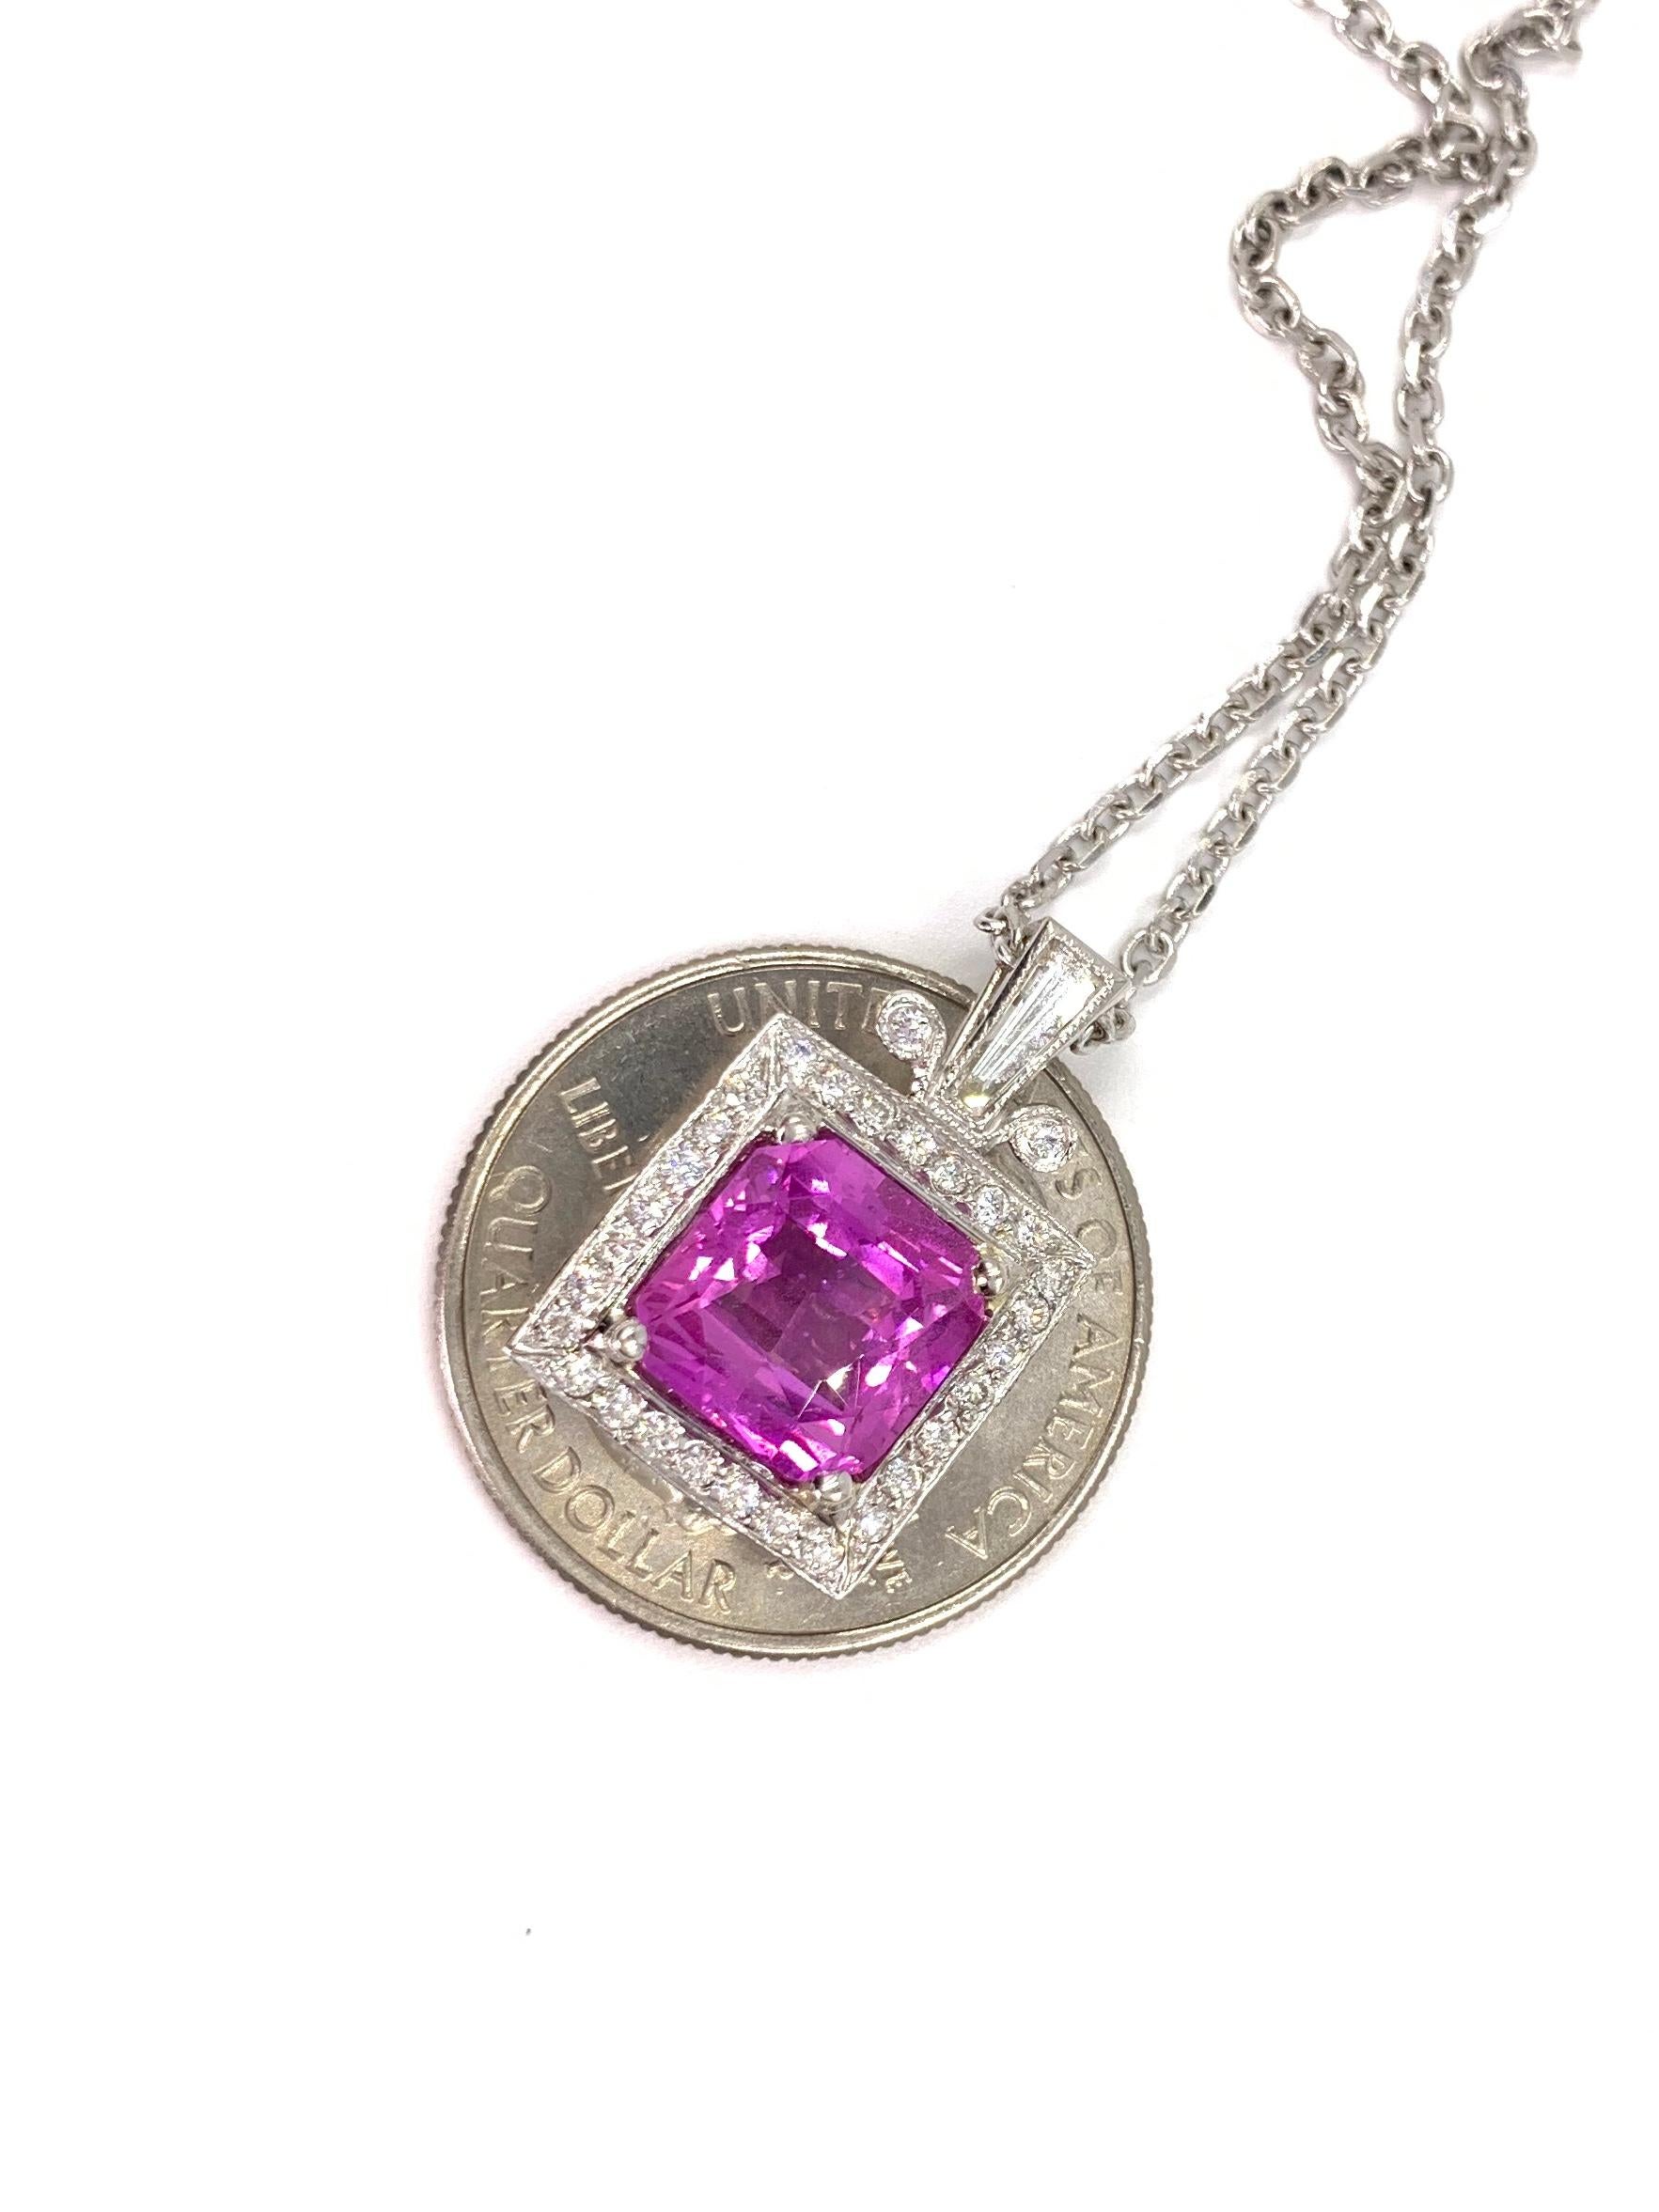 Women's 4.74 Carat Pink Sapphire and Diamond Pendant Necklace For Sale